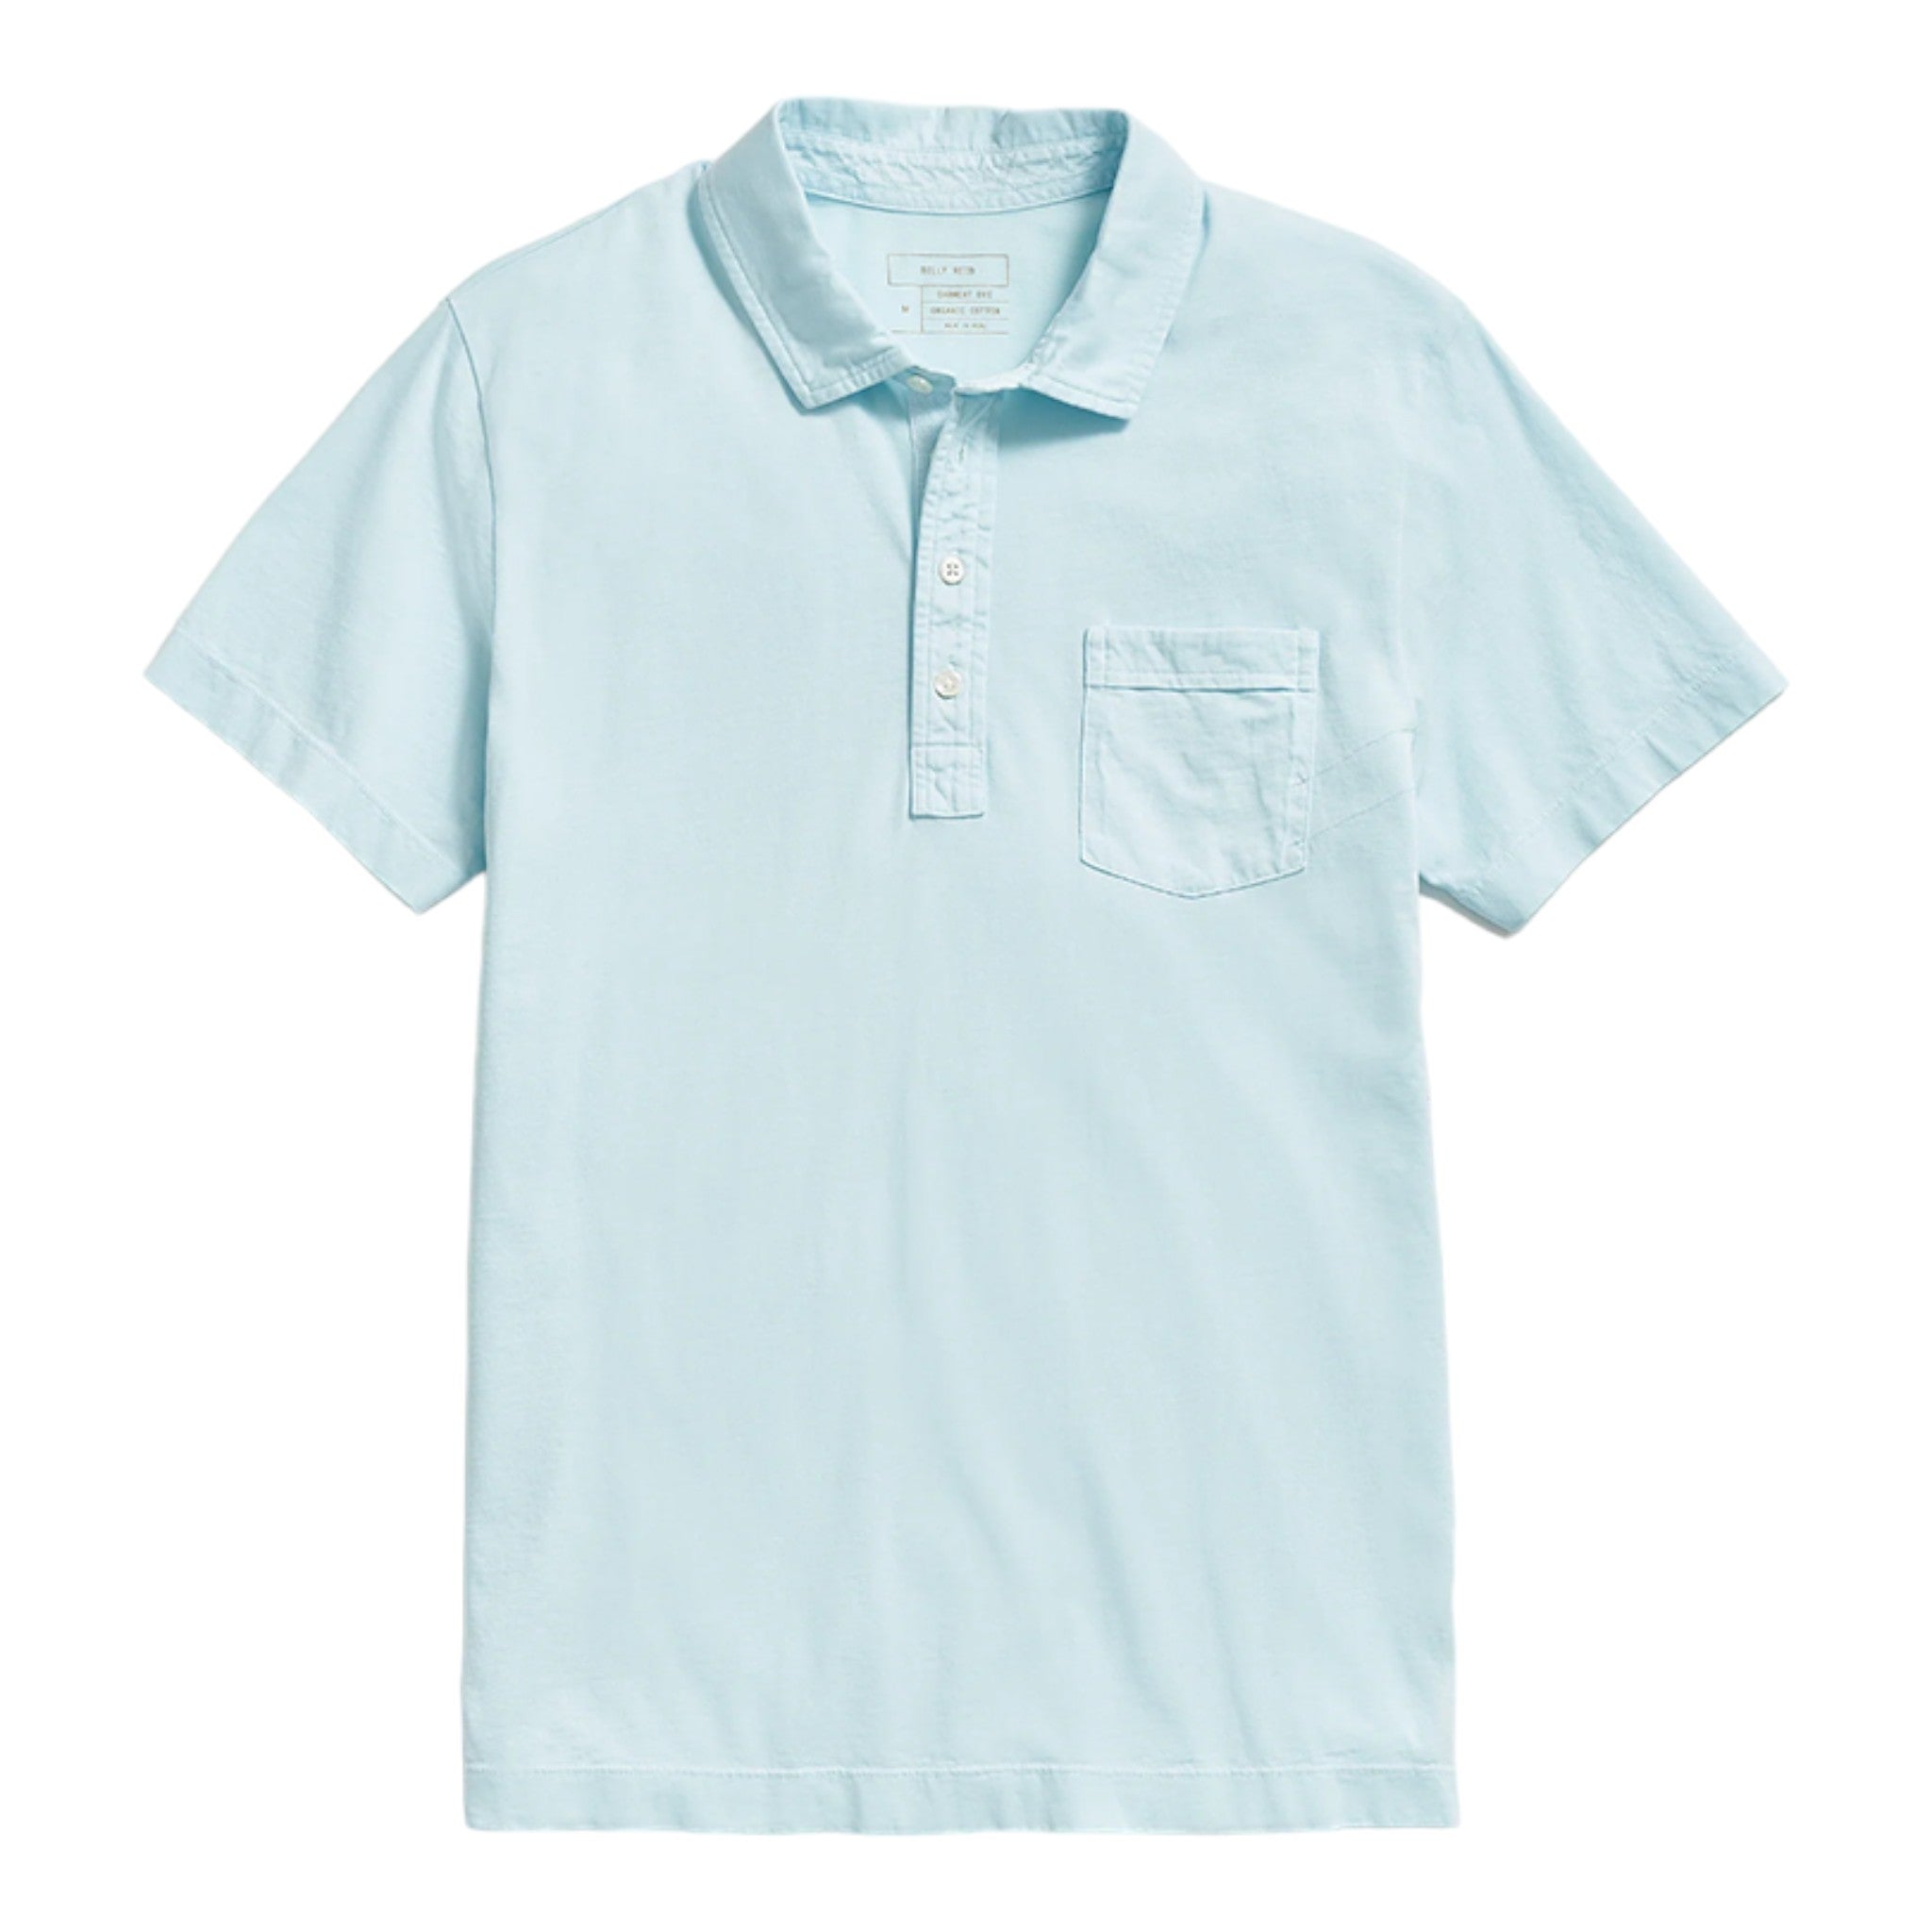 Short sleeve pale blue polo with three buttons